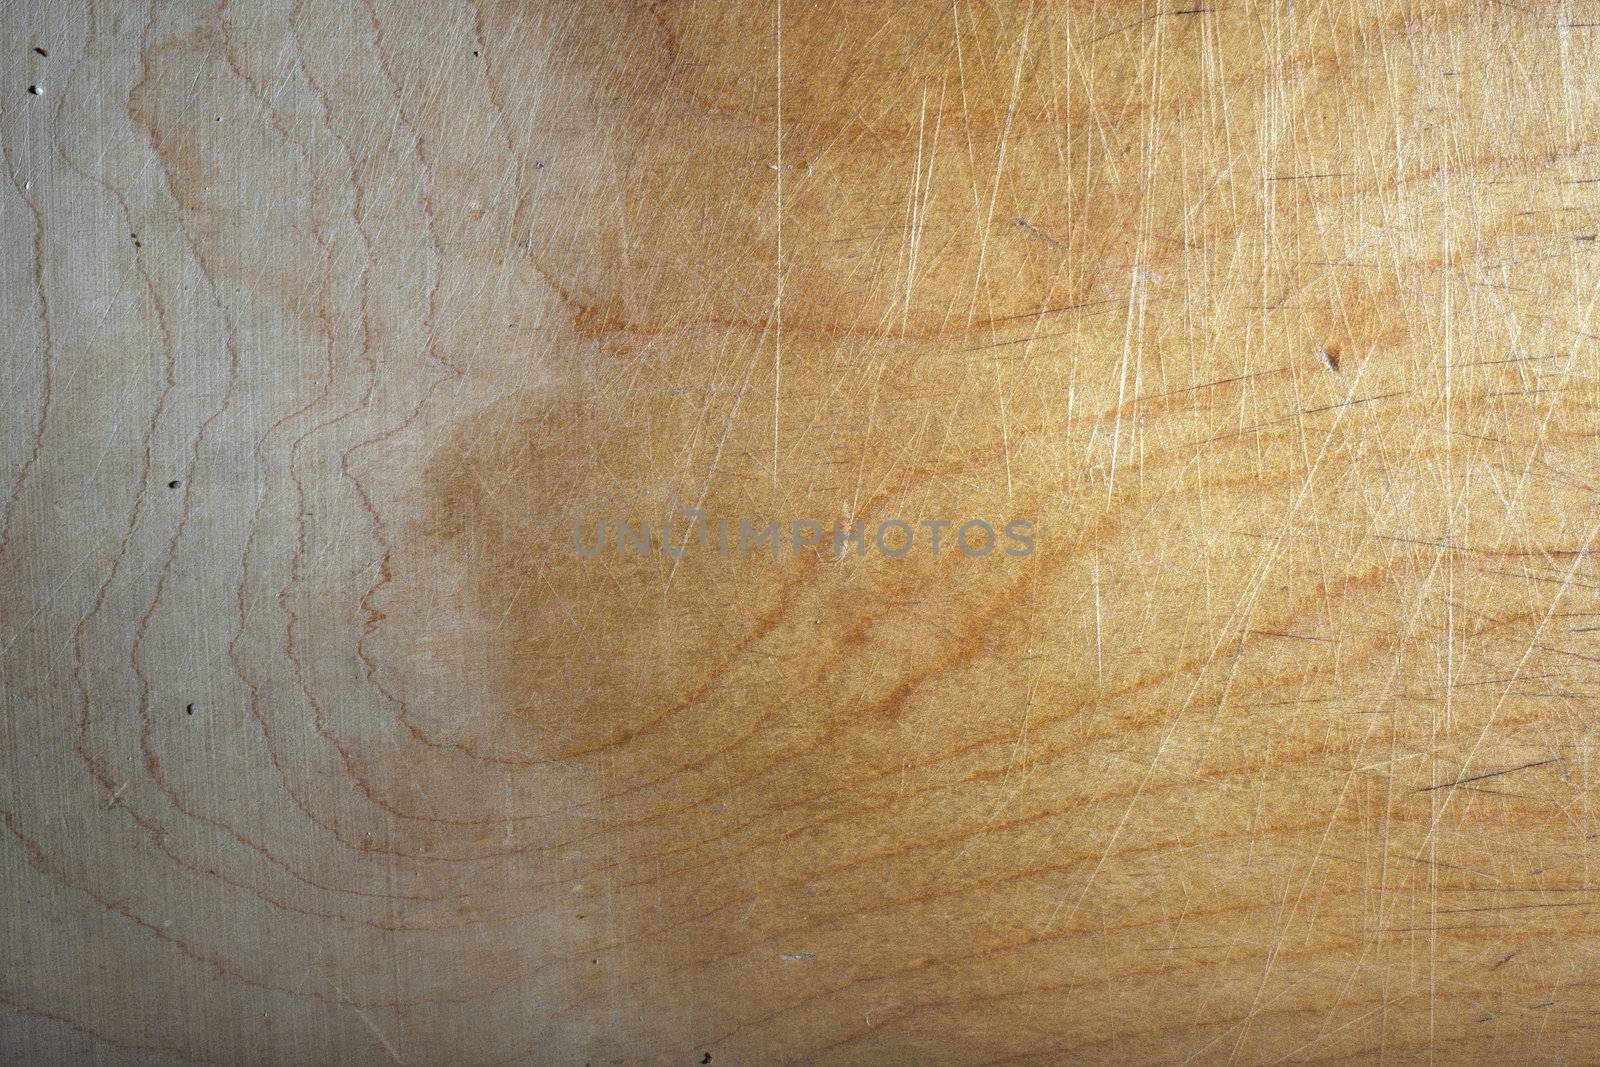 Close-up photo of the scratched wooden texture